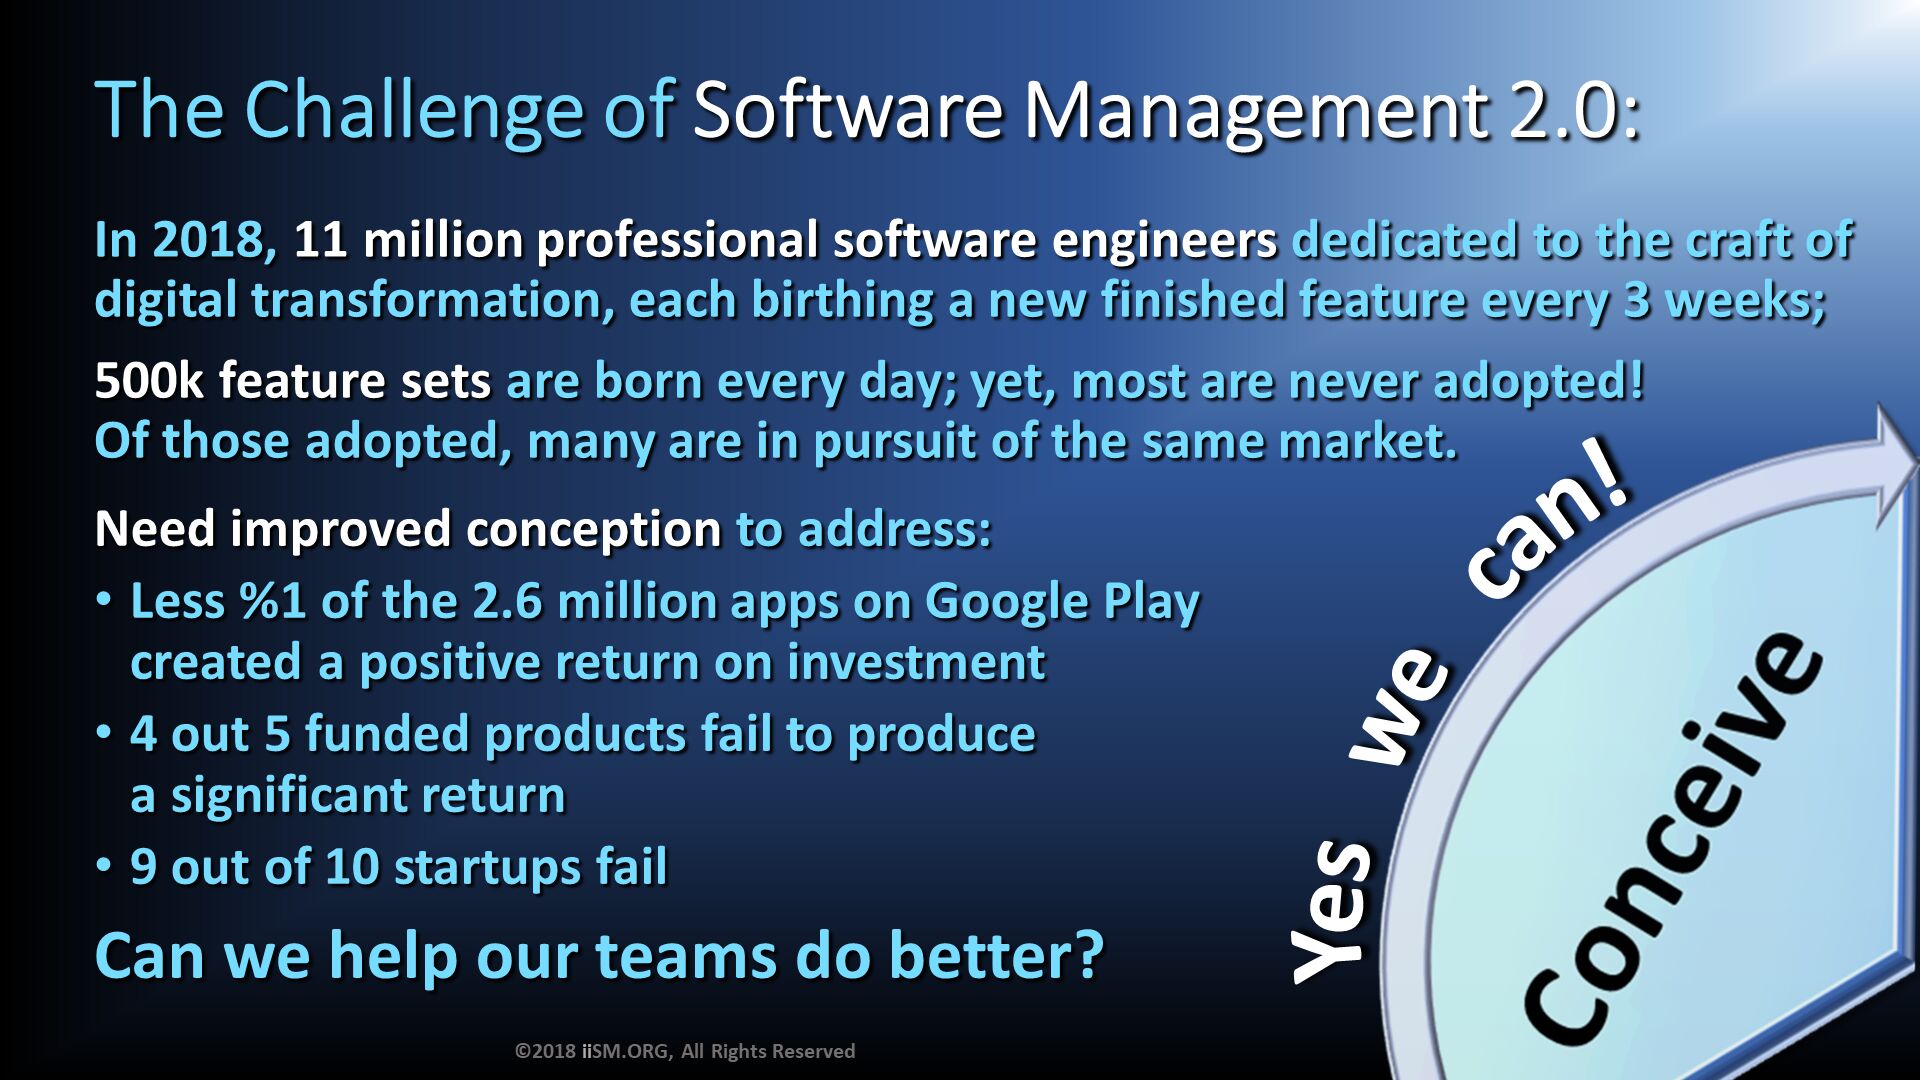 The Challenge of Software Management 2.0:. In 2018, 11 million professional software engineers dedicated to the craft of digital transformation, each birthing a new finished feature every 3 weeks;
500k feature sets are born every day; yet, most are never adopted!Of those adopted, many are in pursuit of the same market. ©2018 iiSM.ORG, All Rights Reserved. Need improved conception to address:
Less %1 of the 2.6 million apps on Google Play created a positive return on investment
4 out 5 funded products fail to produce a significant return
9 out of 10 startups fail
Can we help our teams do better?  . Yes   we   can!. 